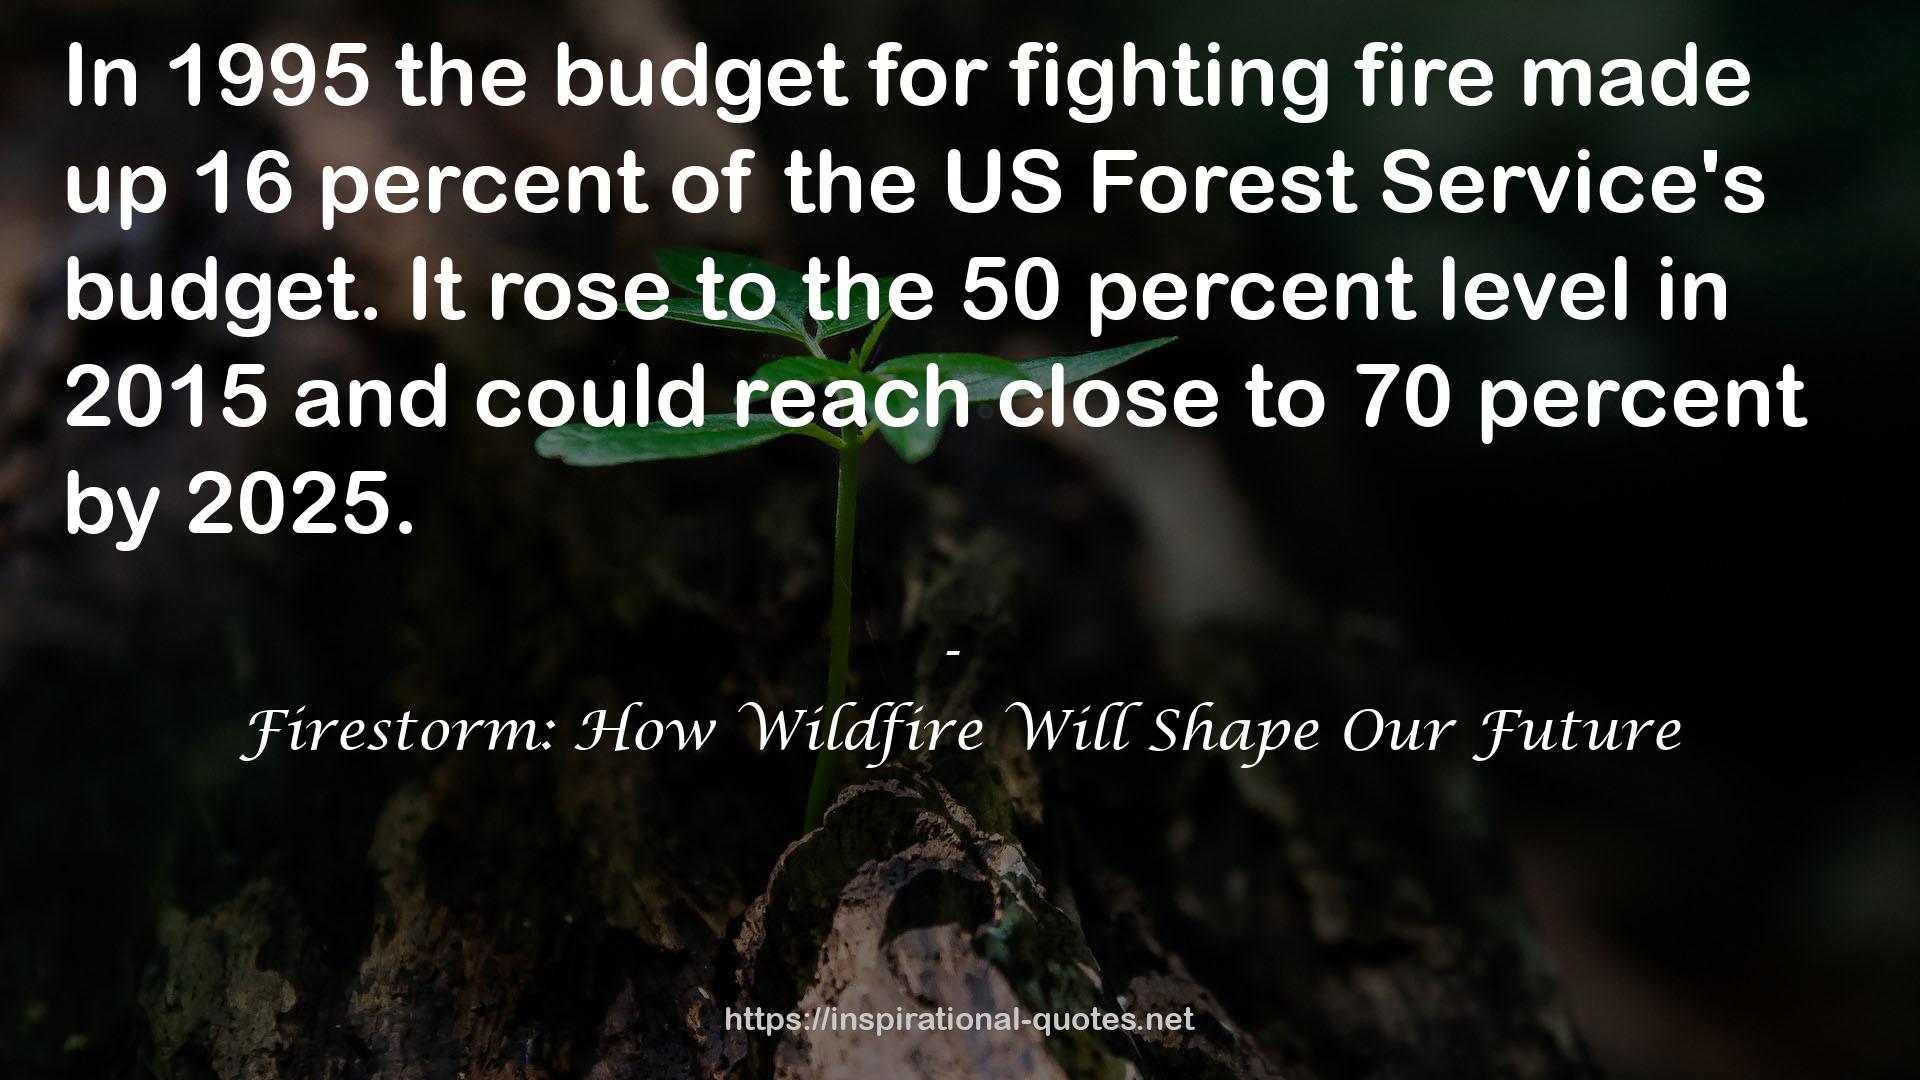 Firestorm: How Wildfire Will Shape Our Future QUOTES